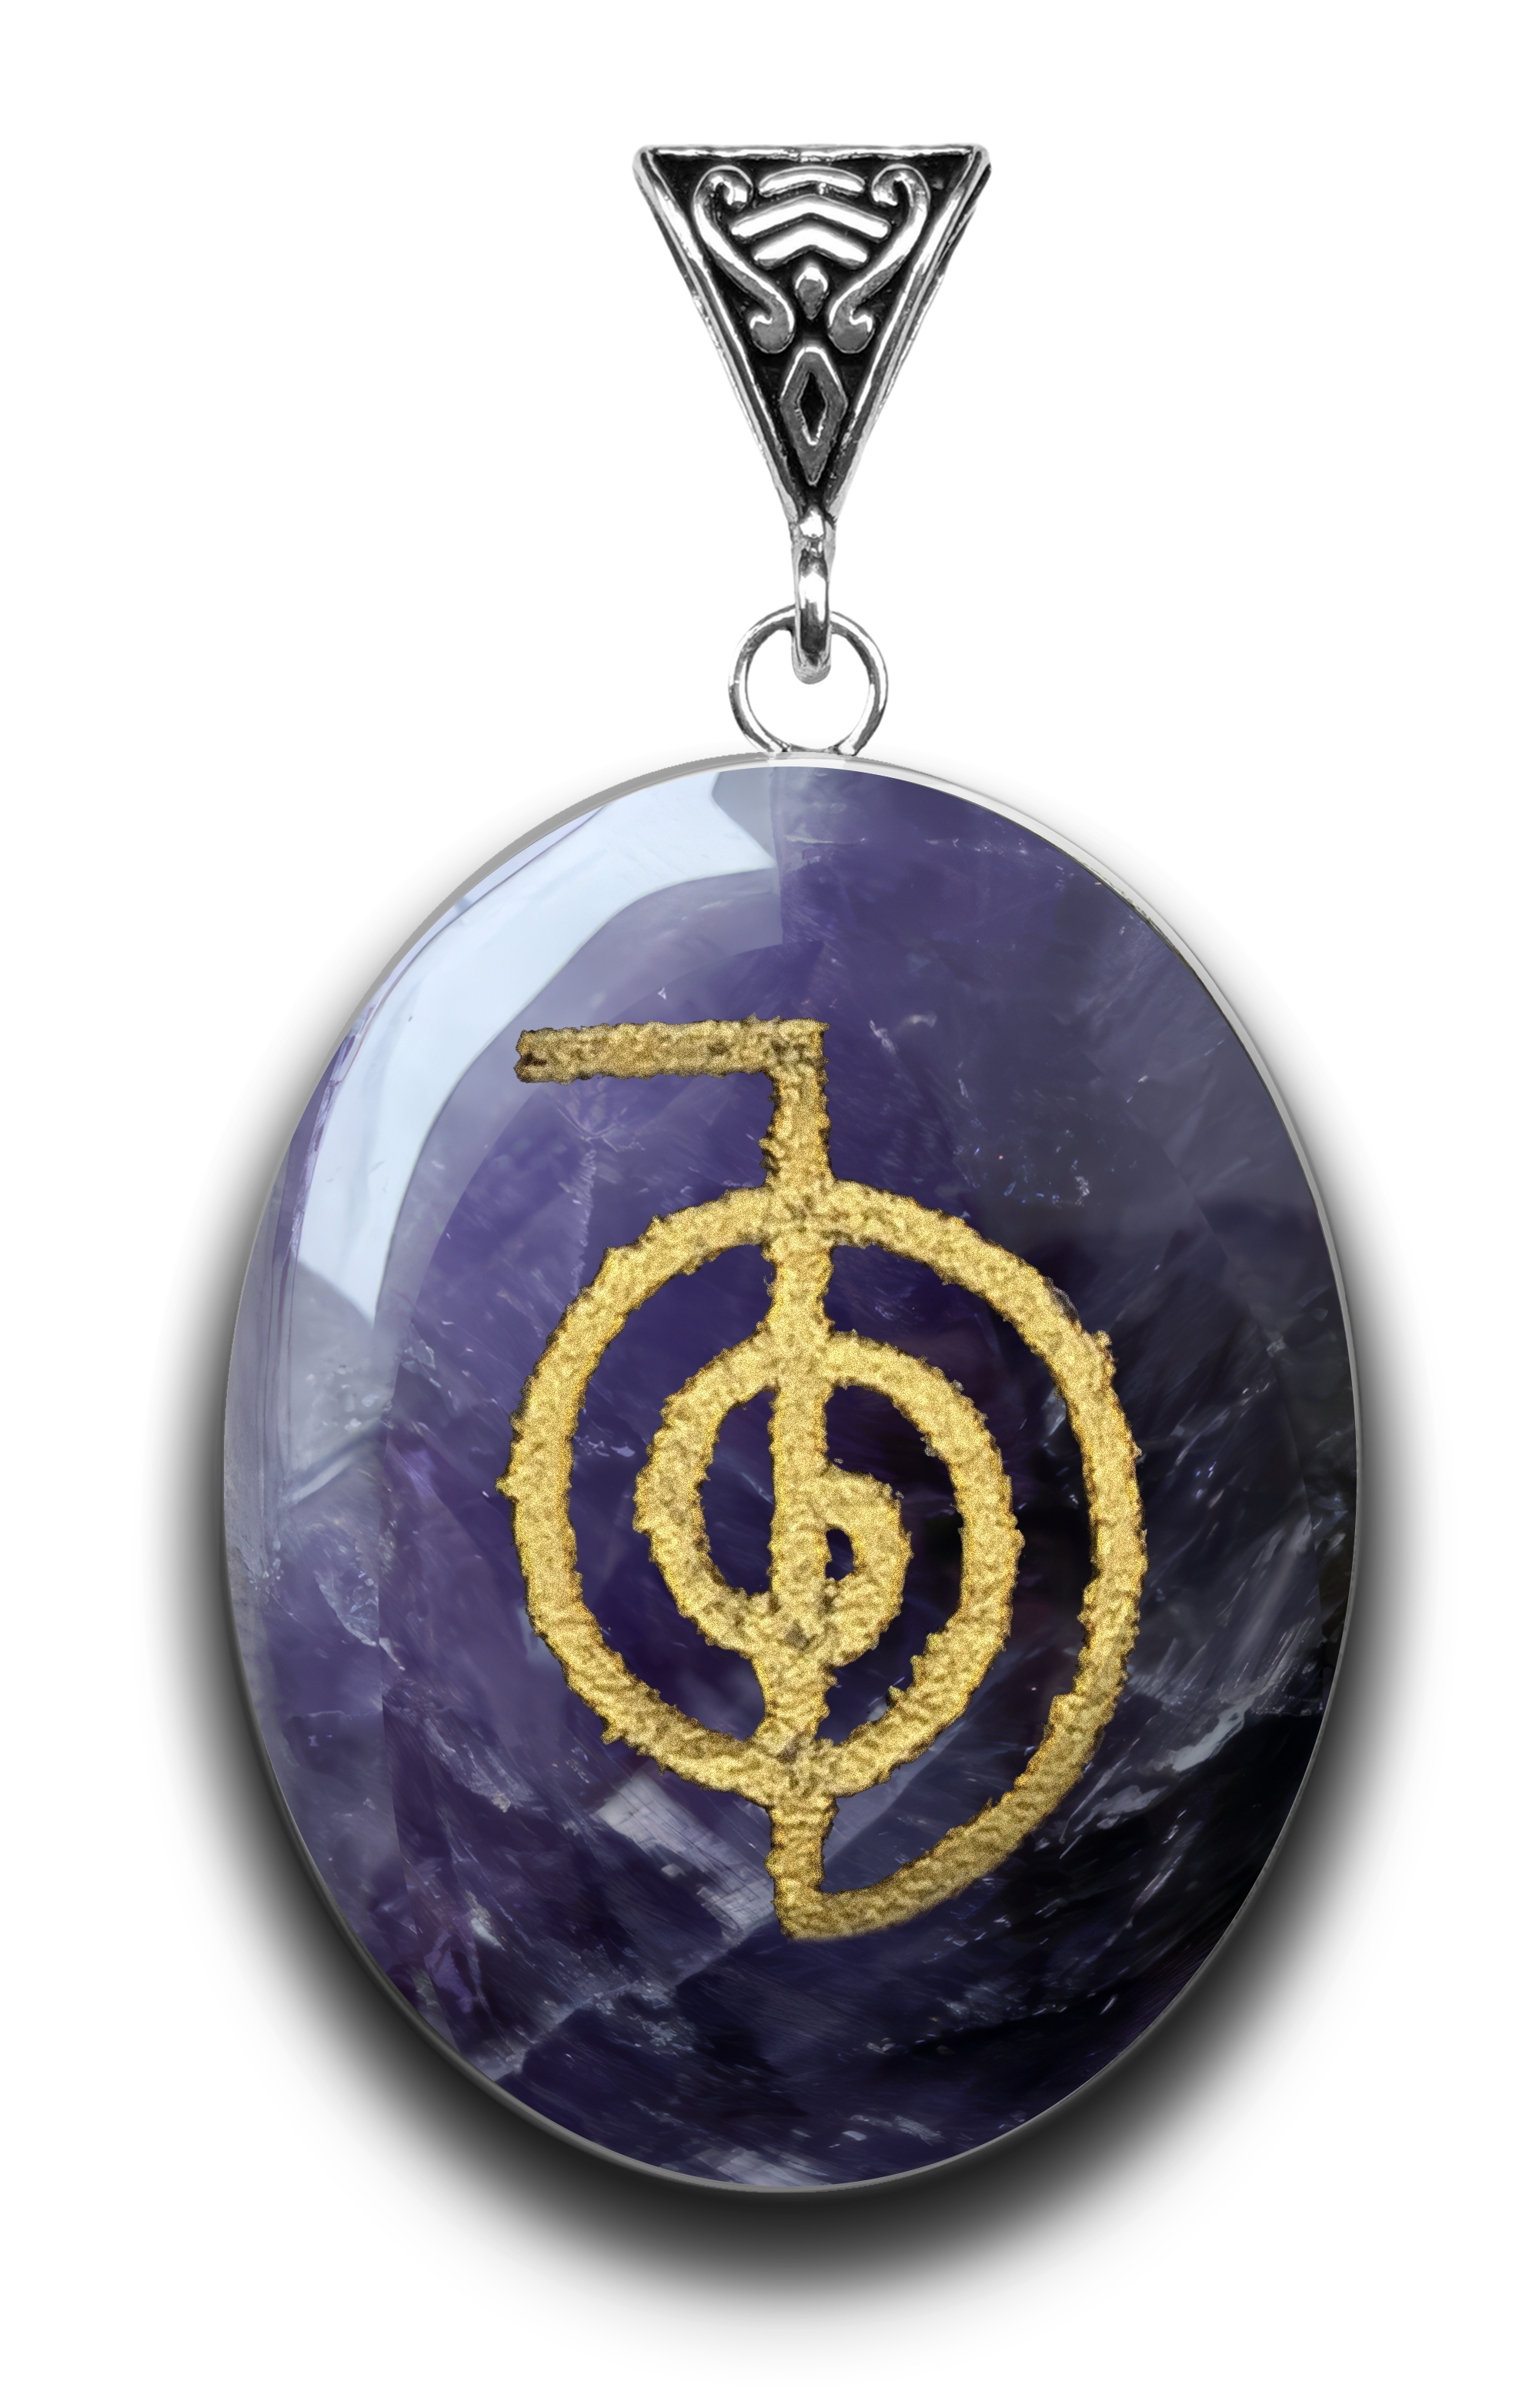 CHOKU REI ON AMETHYST FOR CLEARING NEGATIVE ENERGY - Click Image to Close